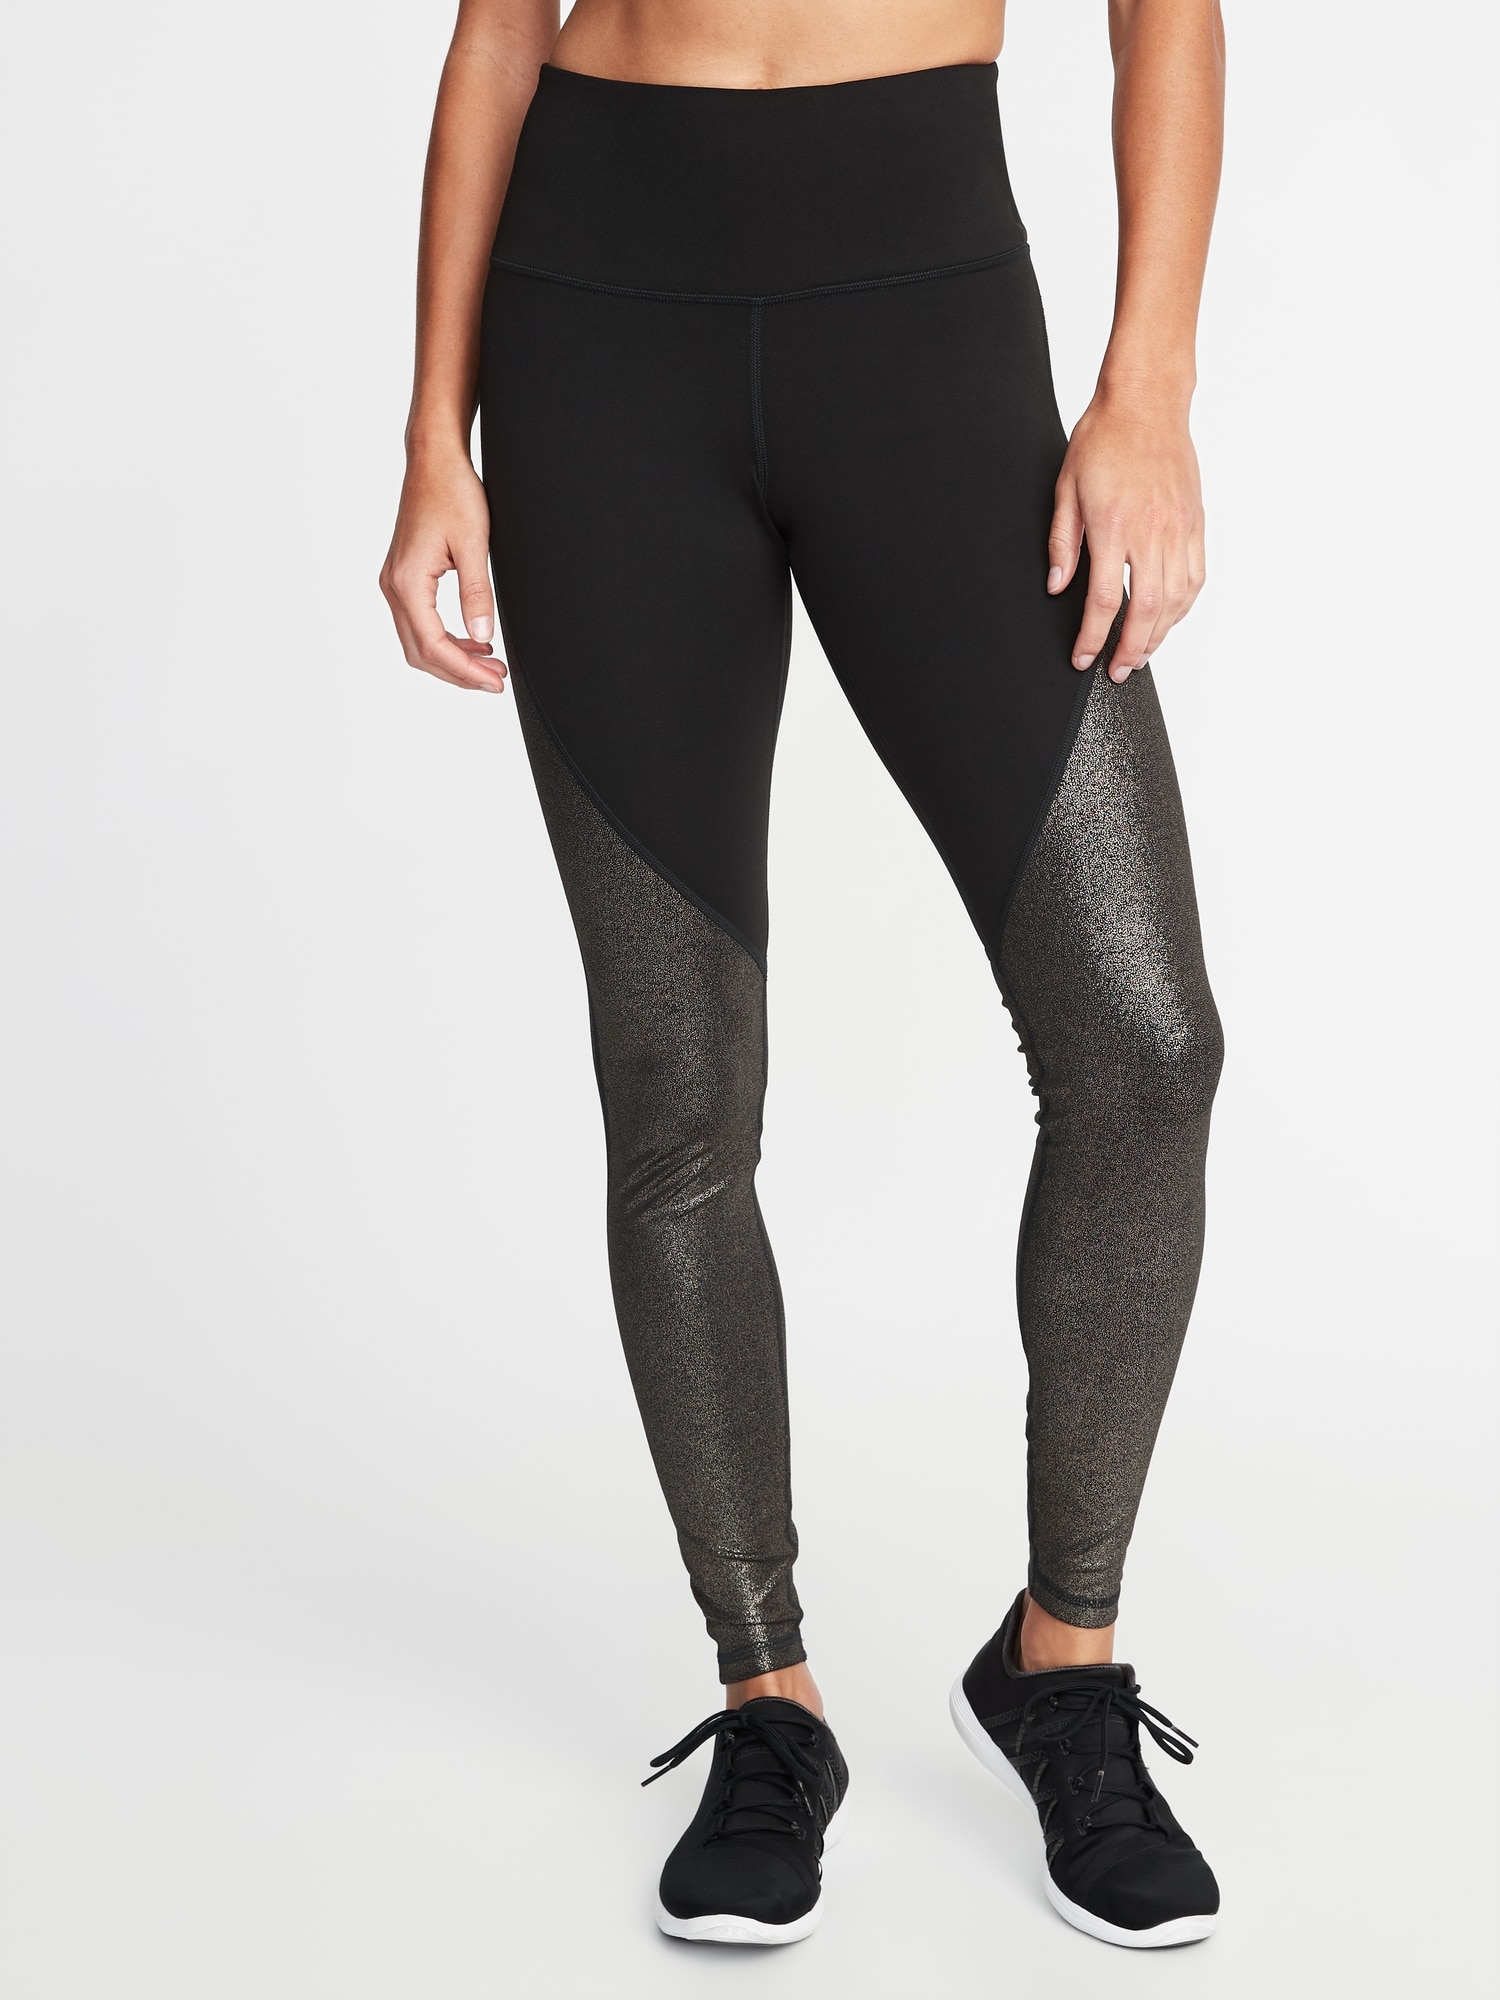 My Time To Shine- {Sports Bra OR Leggings} Charcoal Shimmer